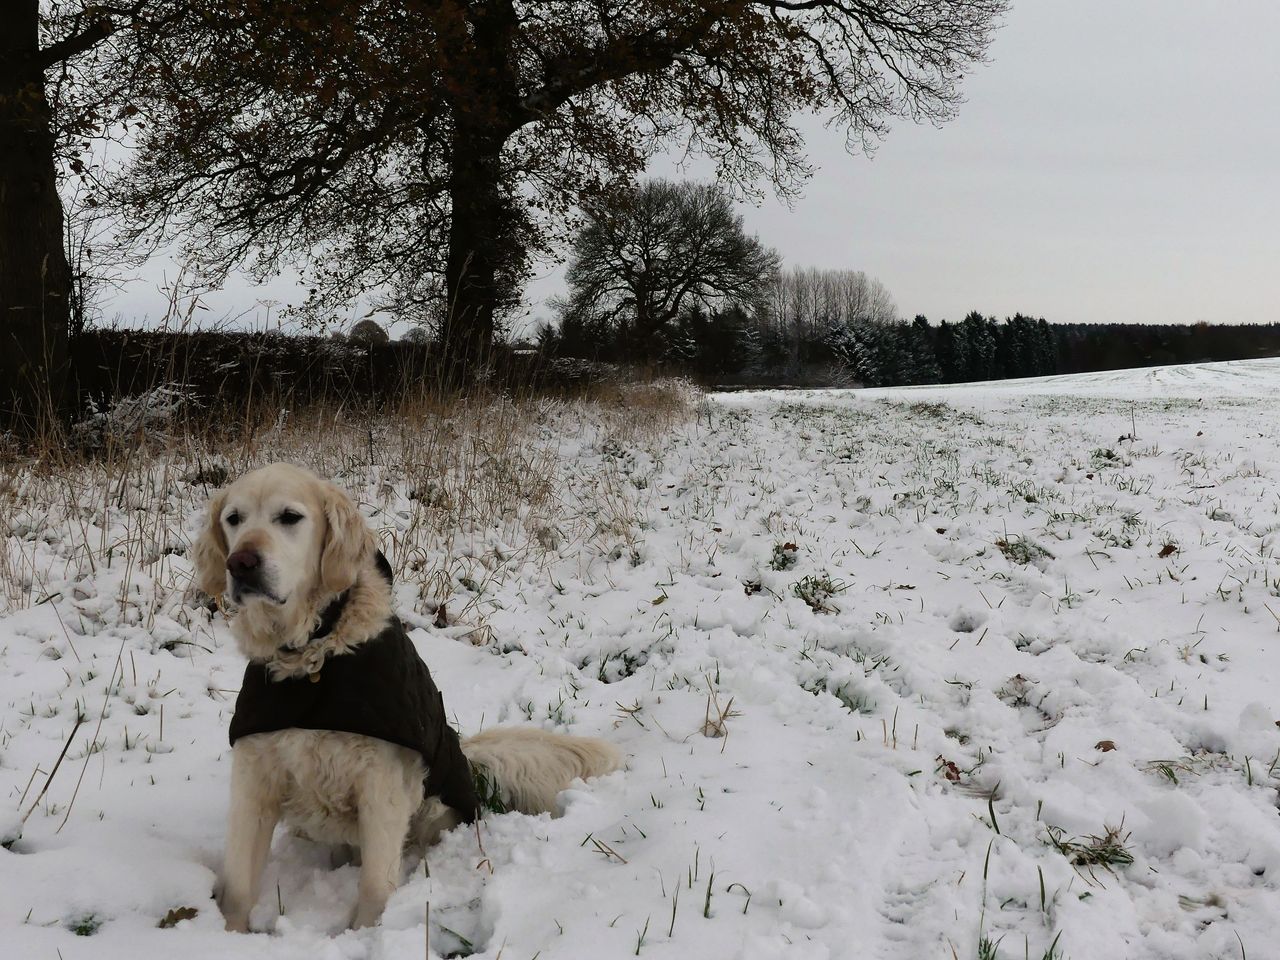 A dog in the snow in Kingstone, Staffordshire on Sunday morning.